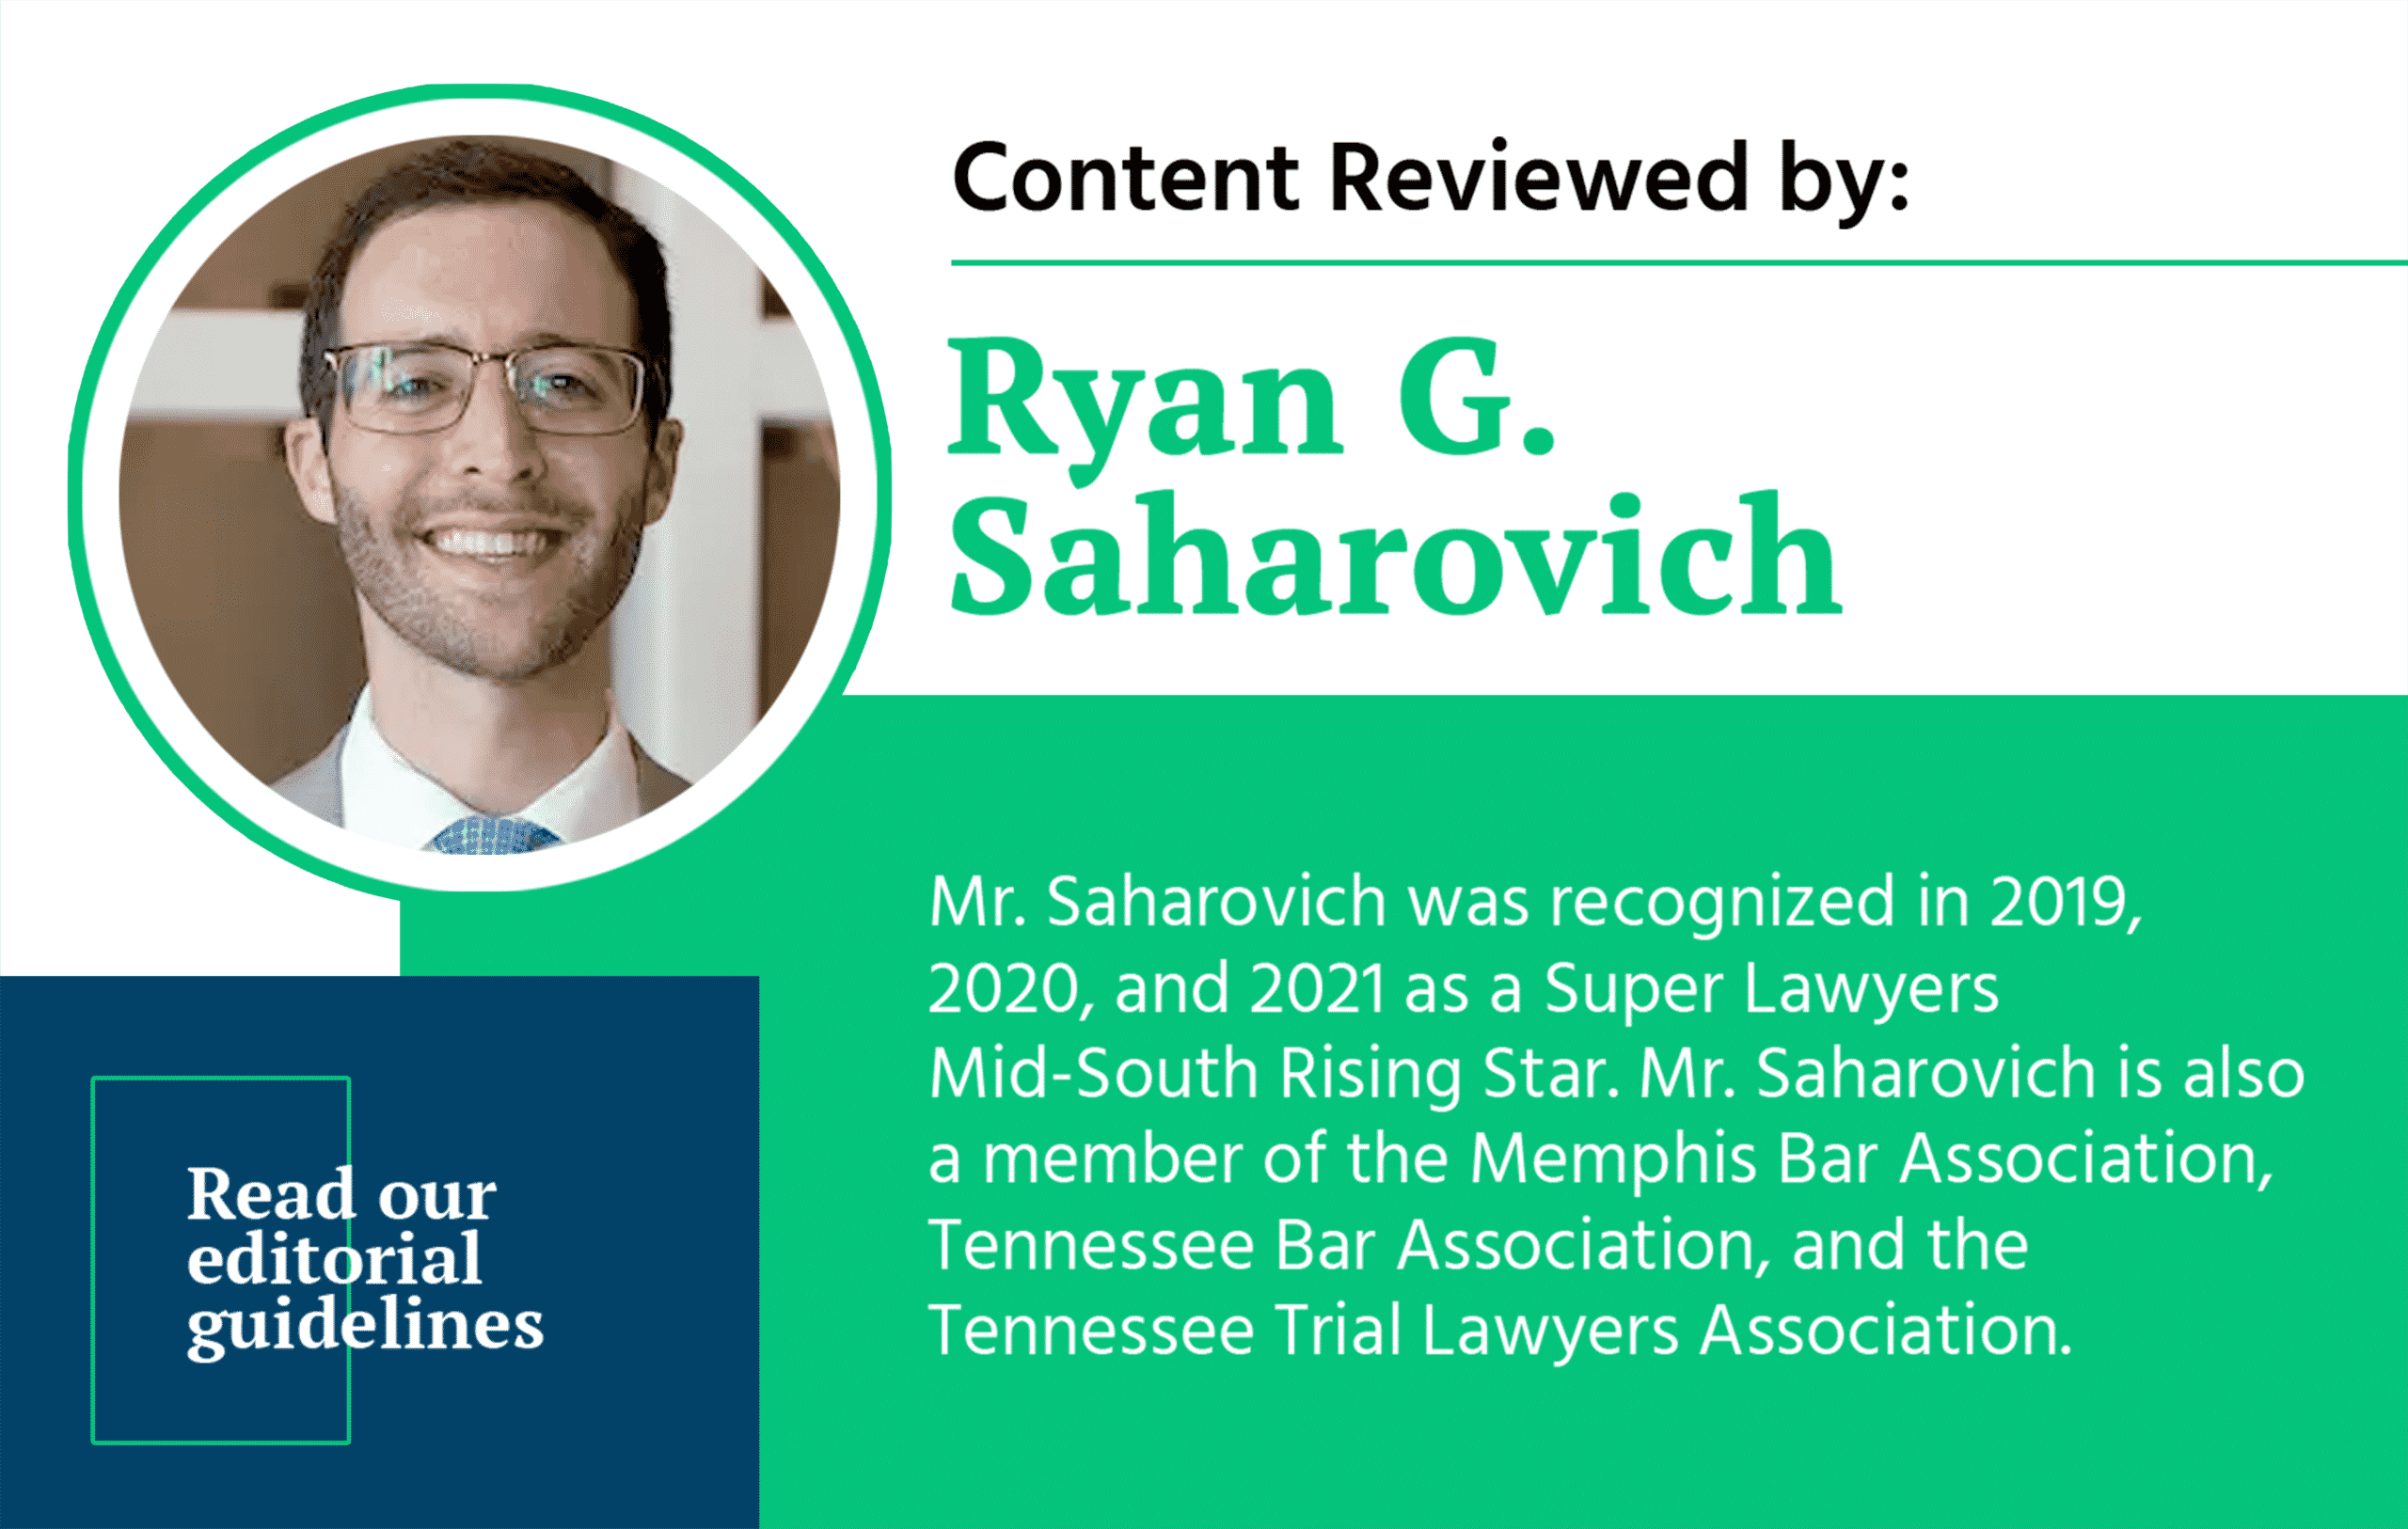 Content Reviewer Box for Ryan G. Saharovich with his awards and credentials